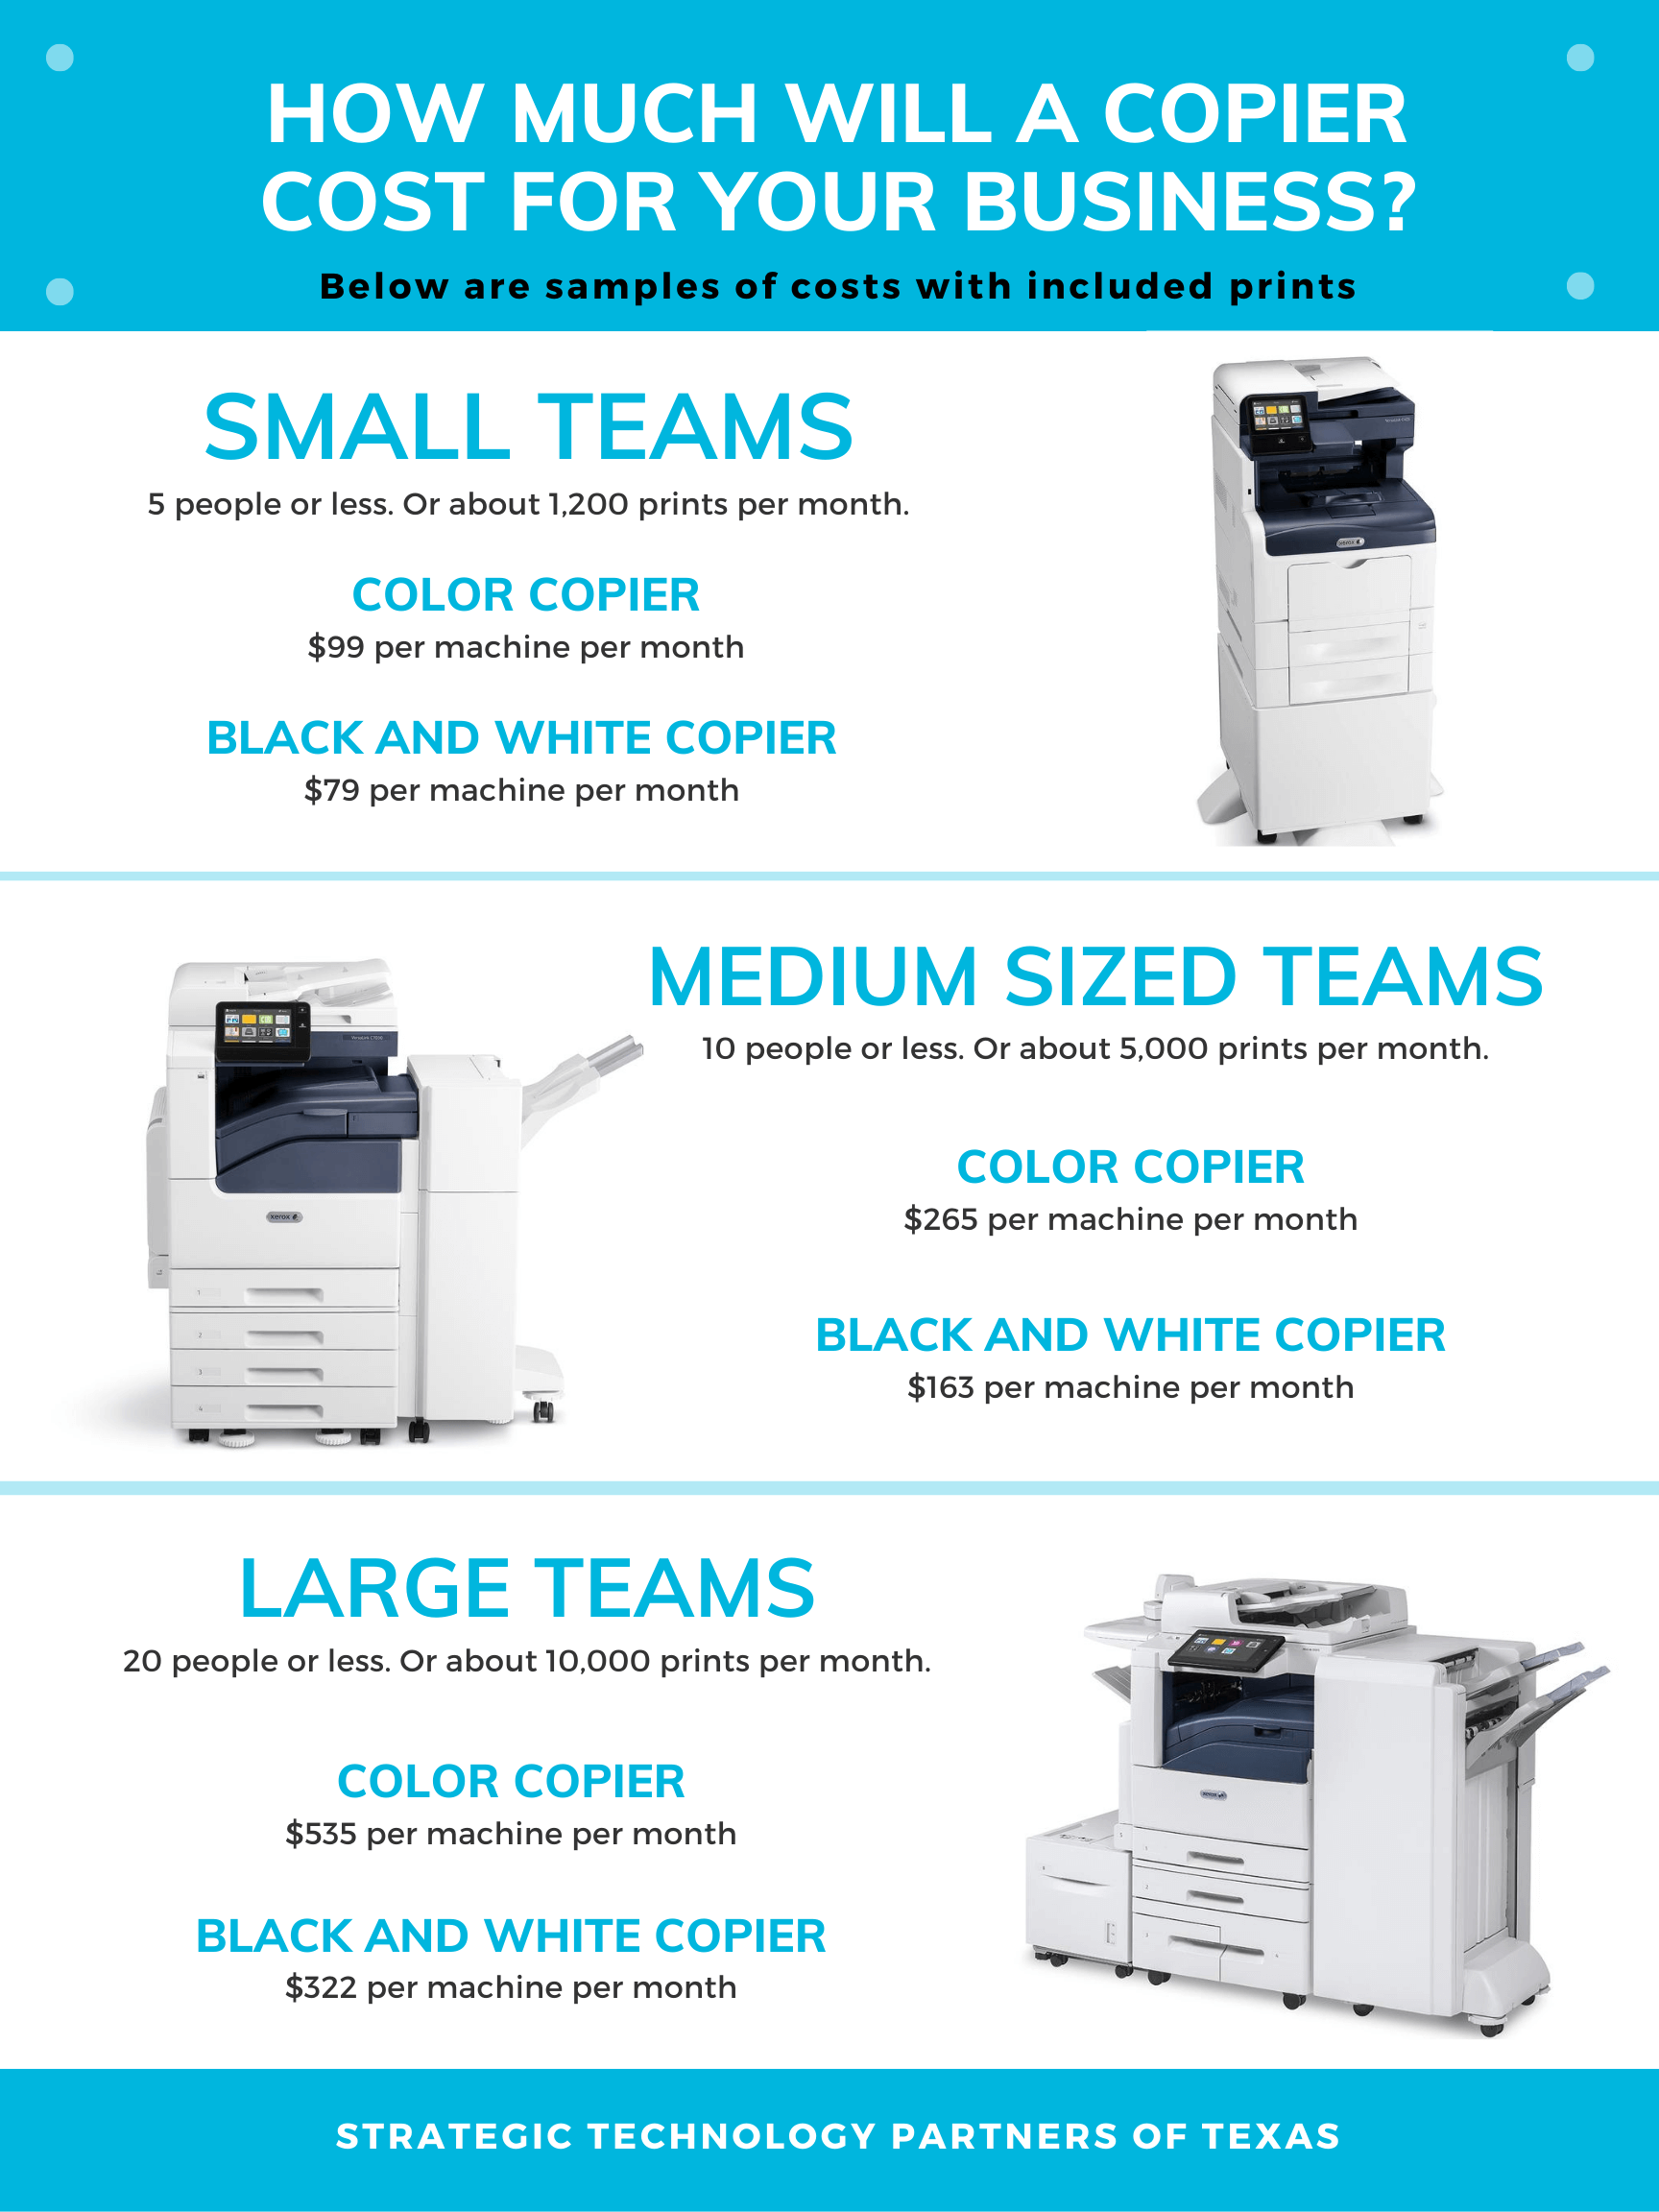 Infographic on how much a copier/printer cost your business